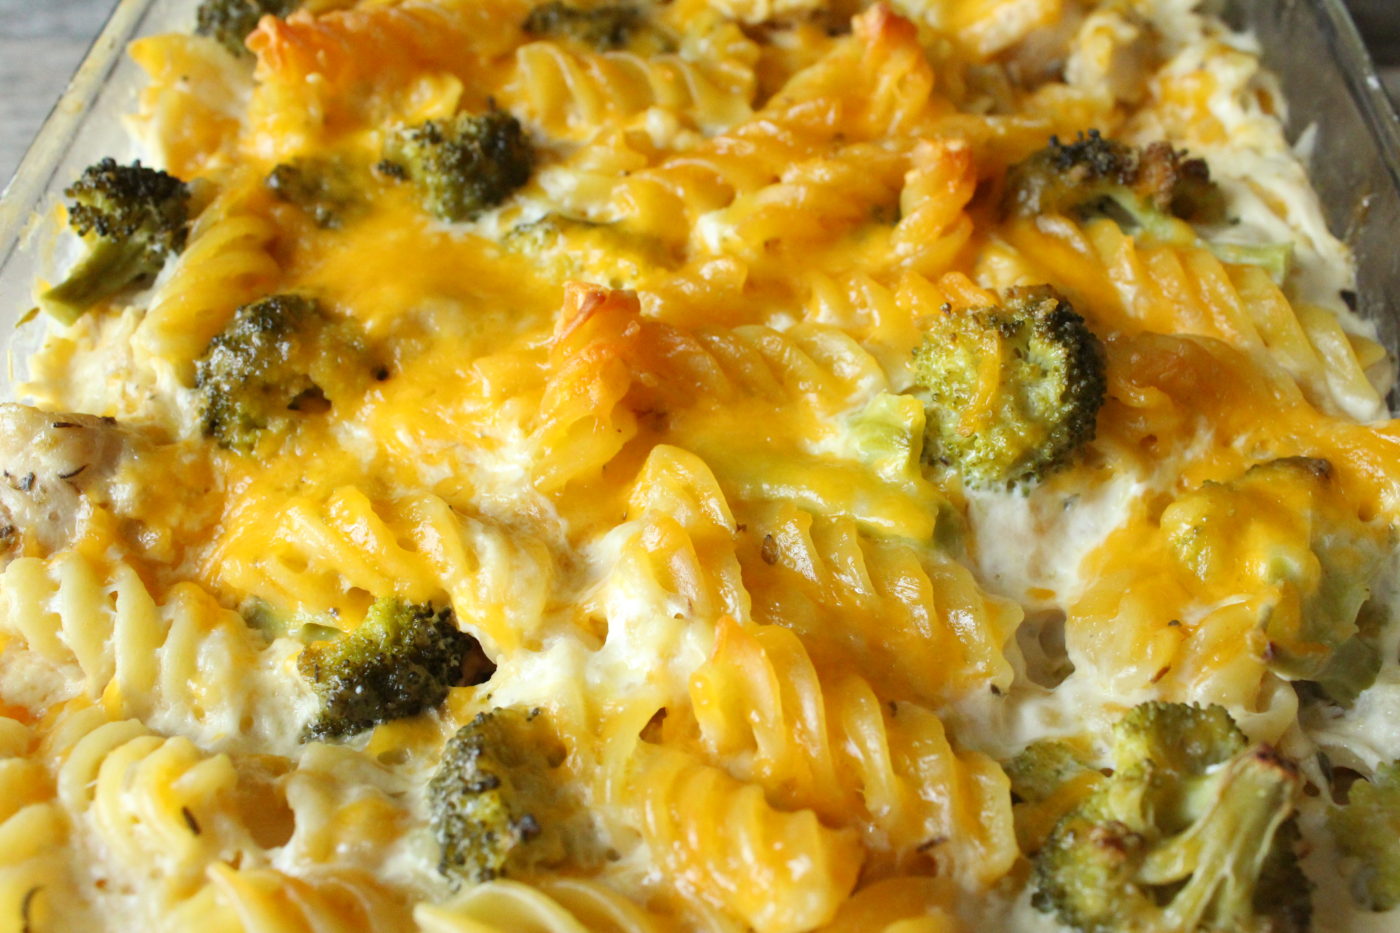 Simple chicken and broccoli bake | Eat.Drink.Frolic.